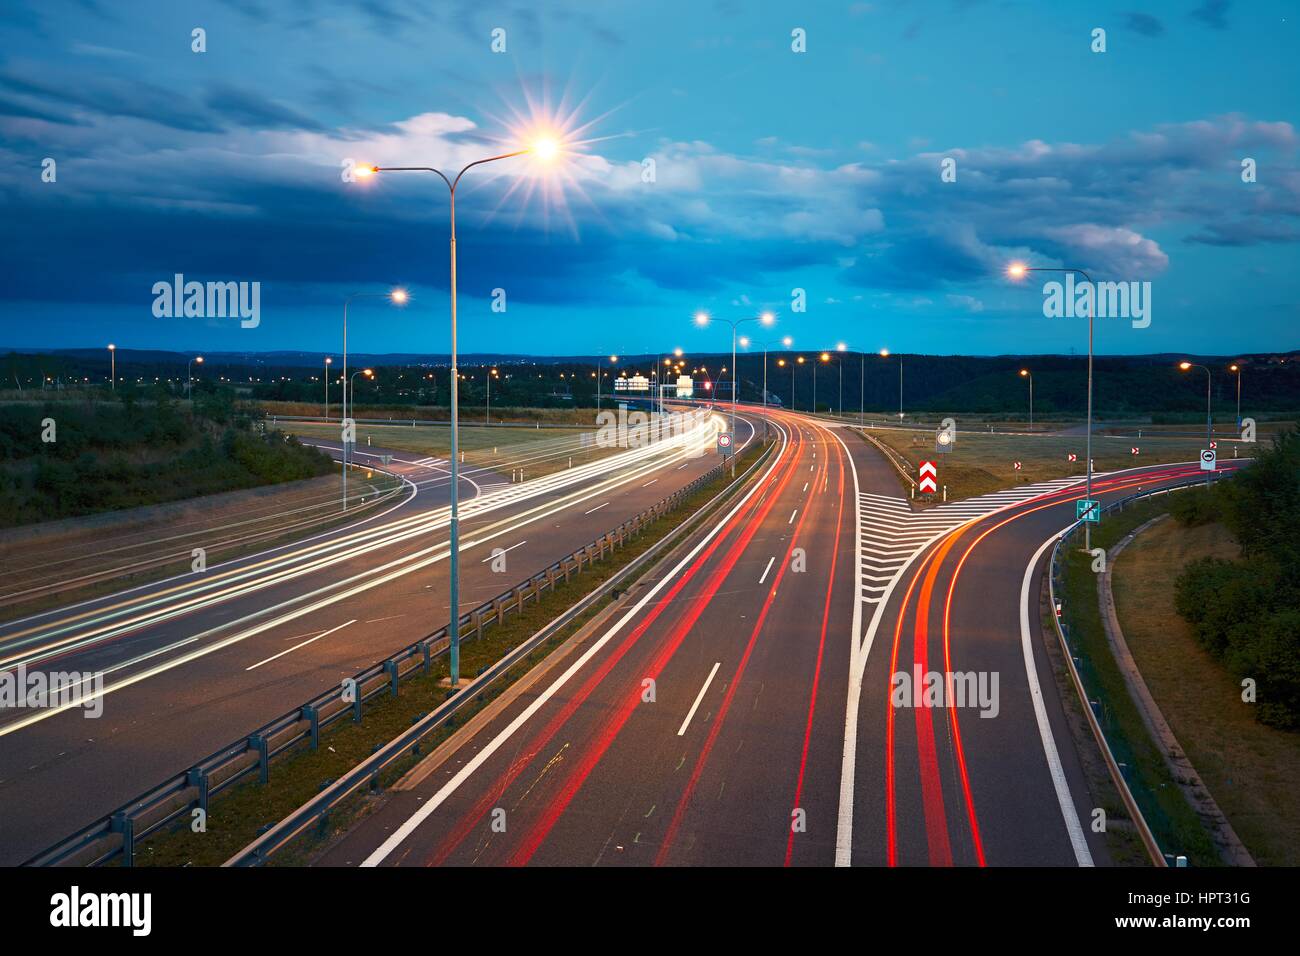 Traffic at night. Lights of the cars and trucks on the highway. Prague, Czech Republic Stock Photo